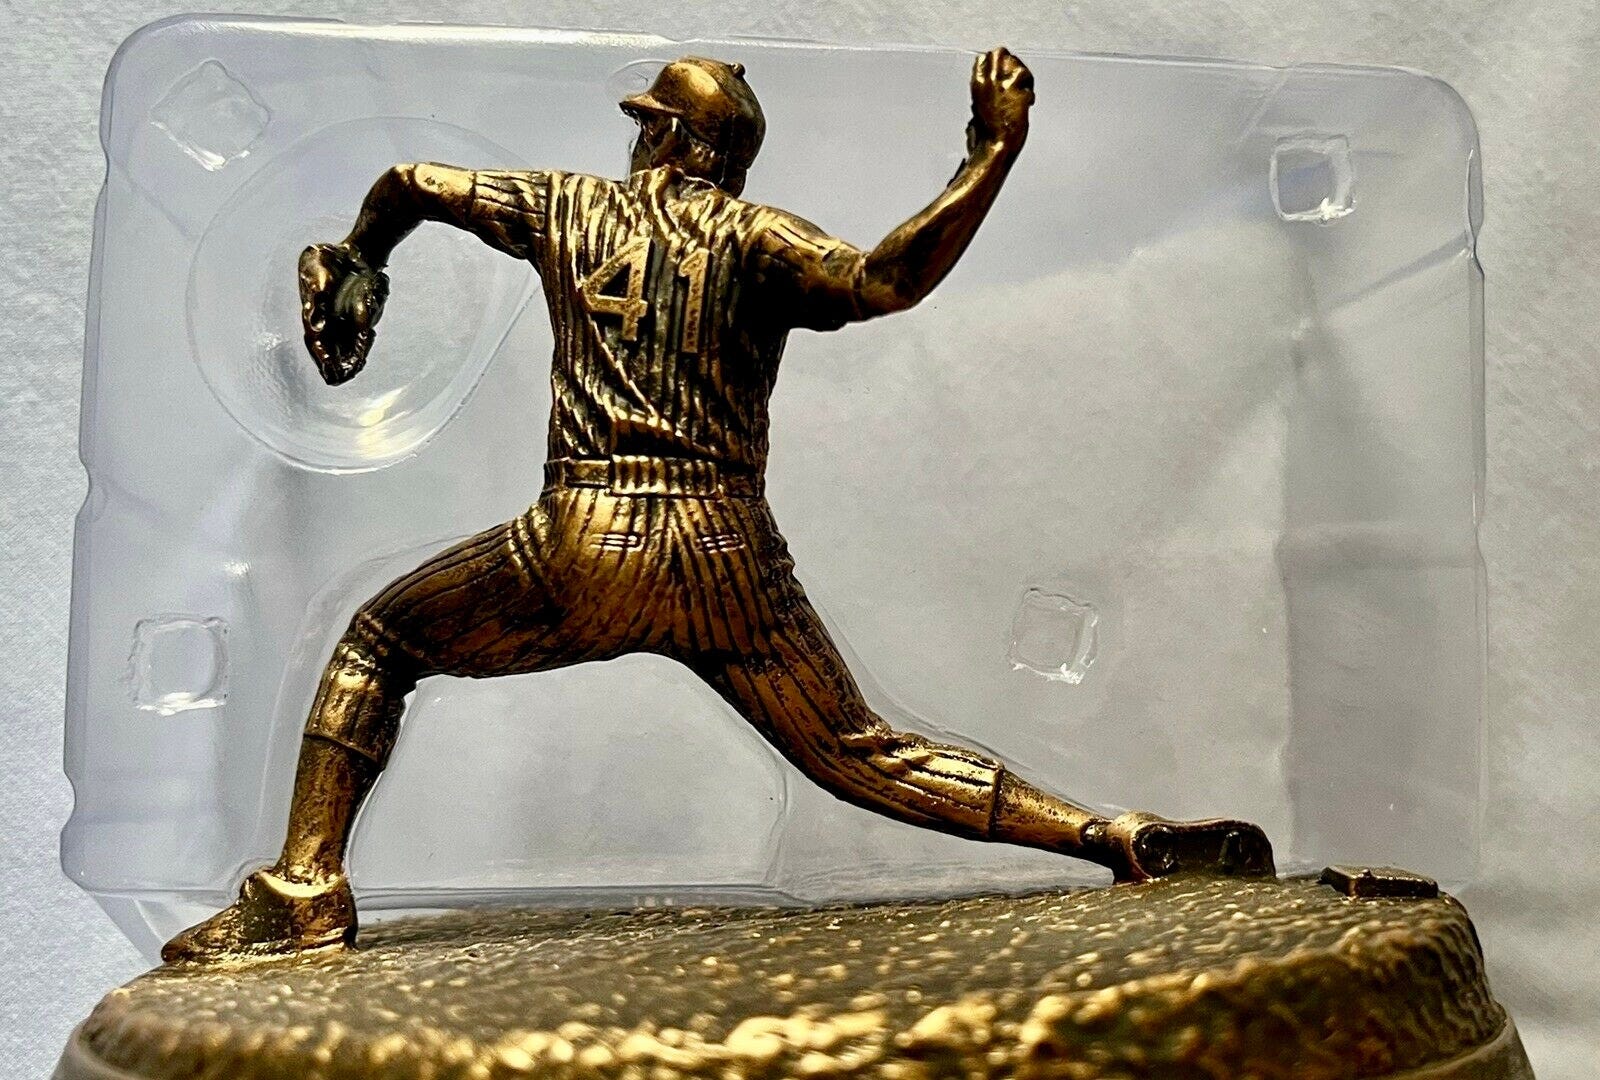 EXCLUSIVE: Mets' Seaver Statue Has Wrong Uni Number Font